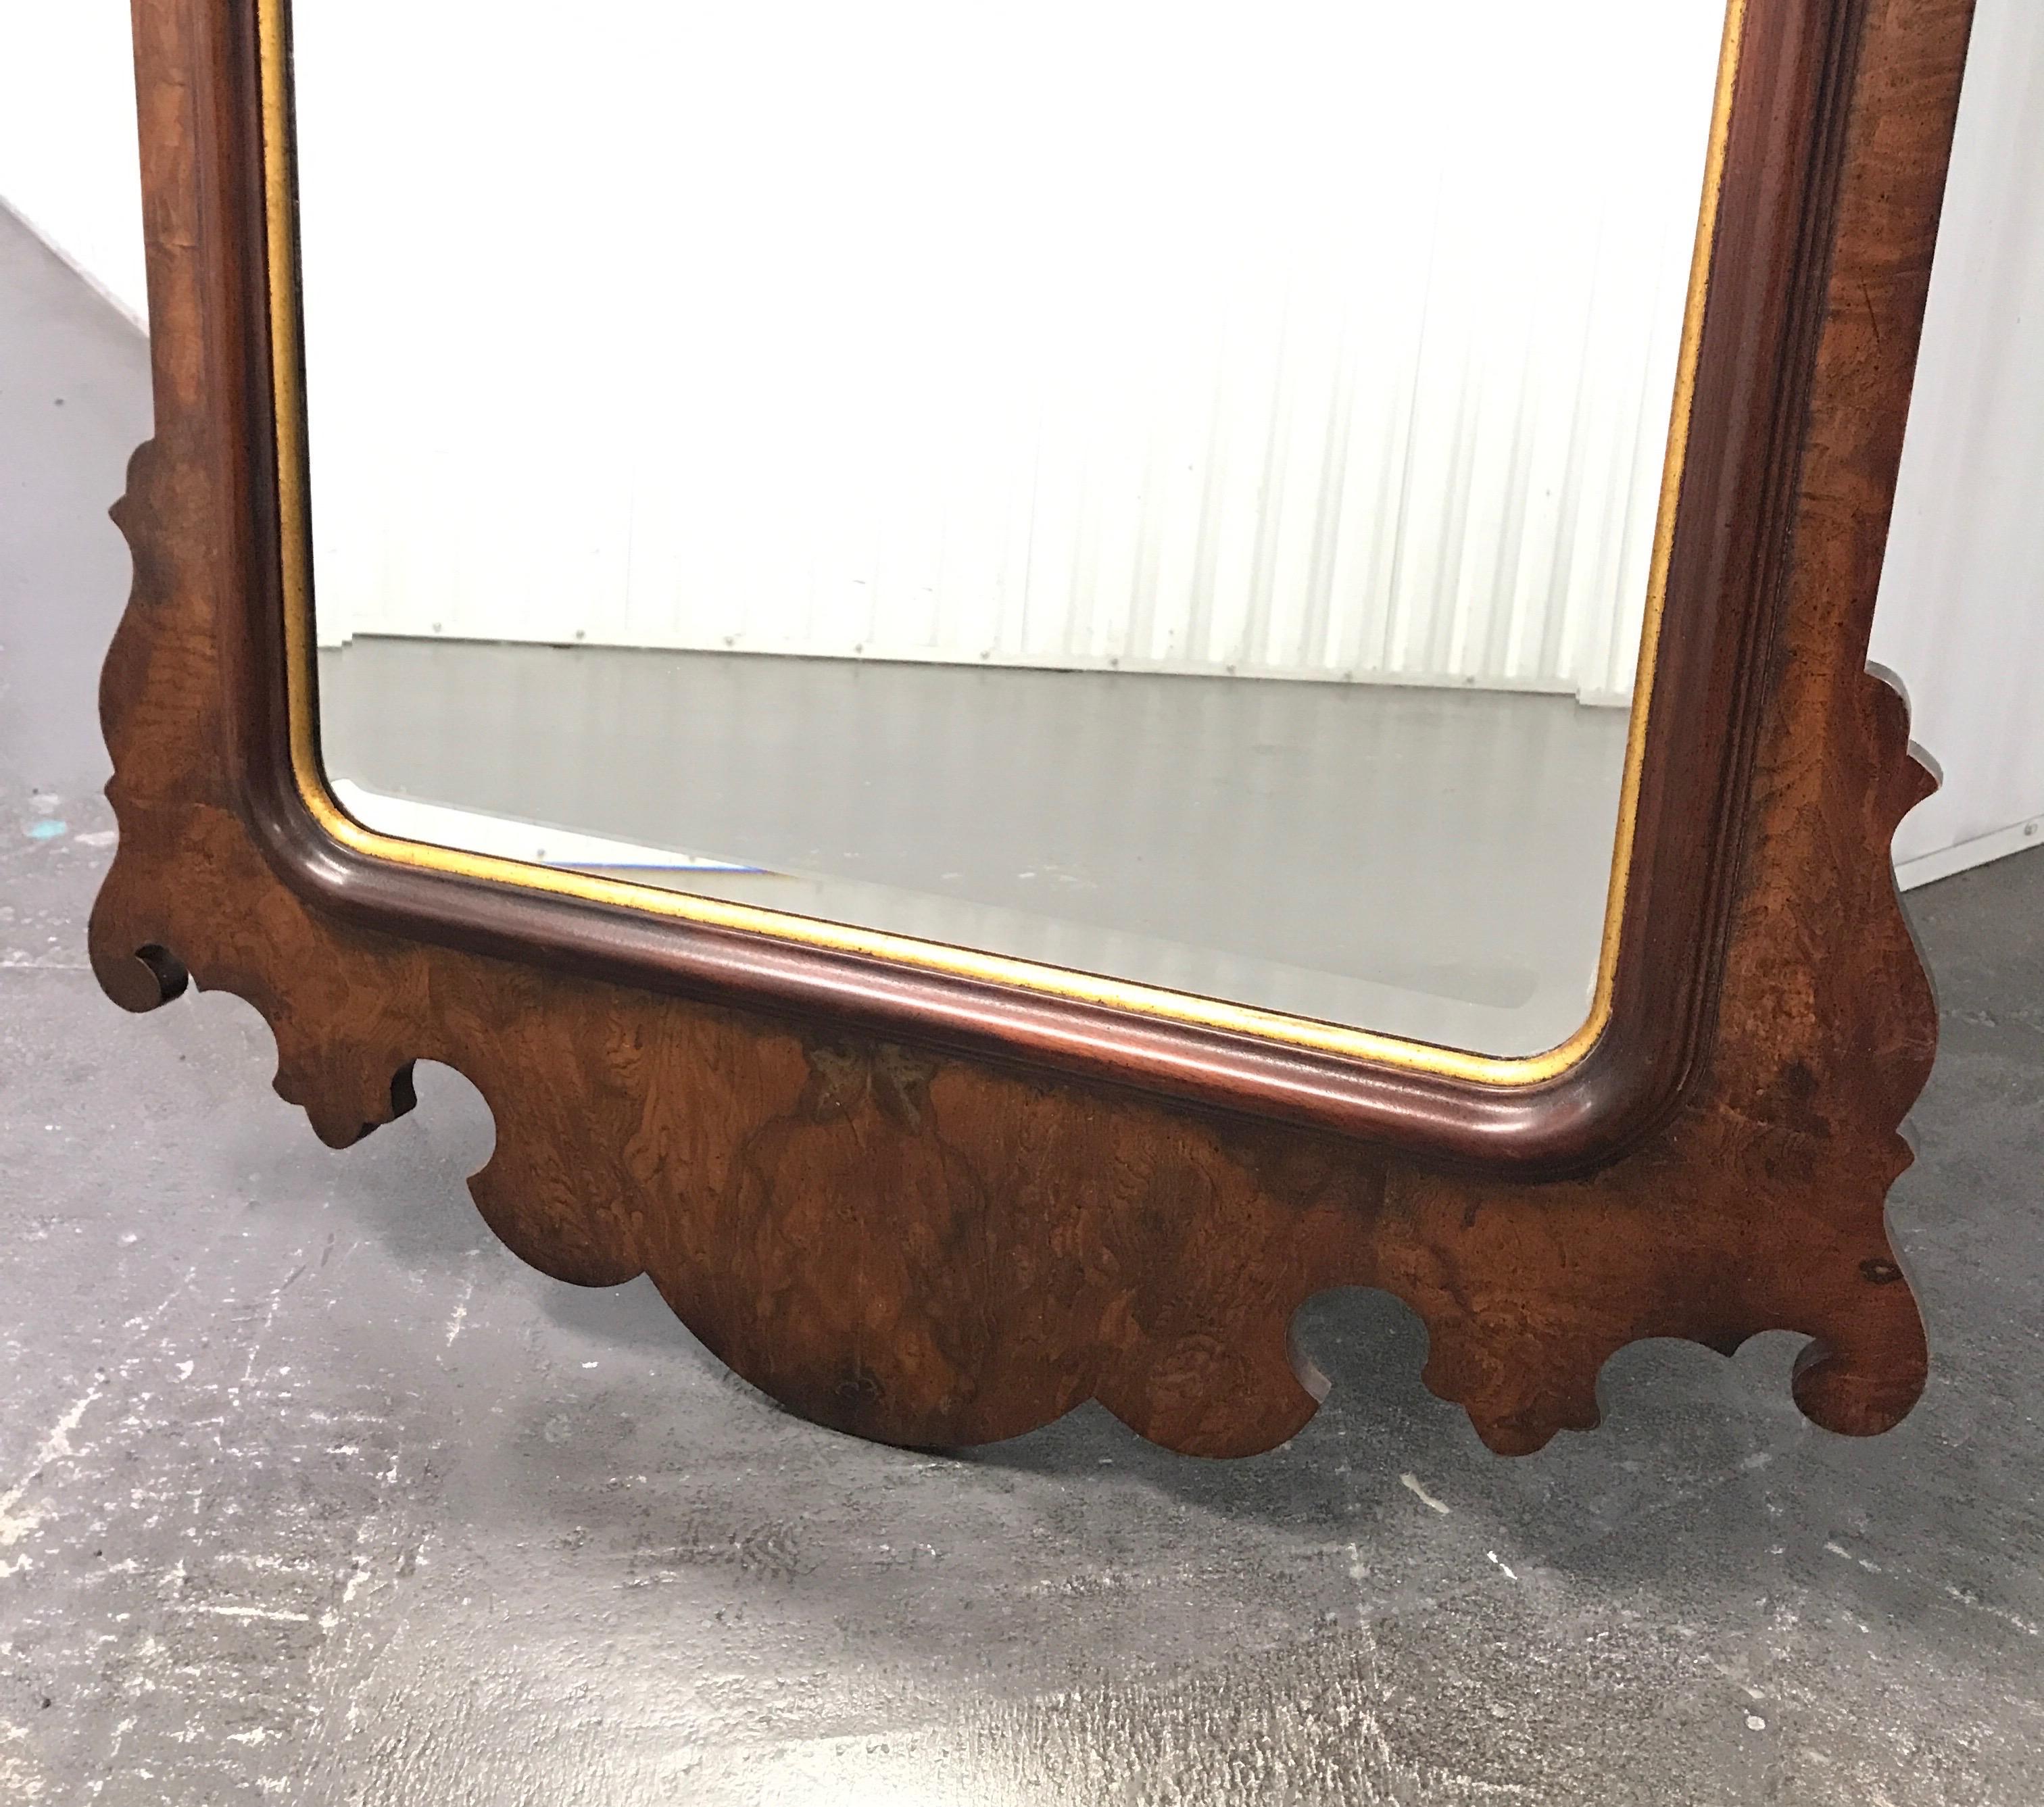 chippendale style mirror